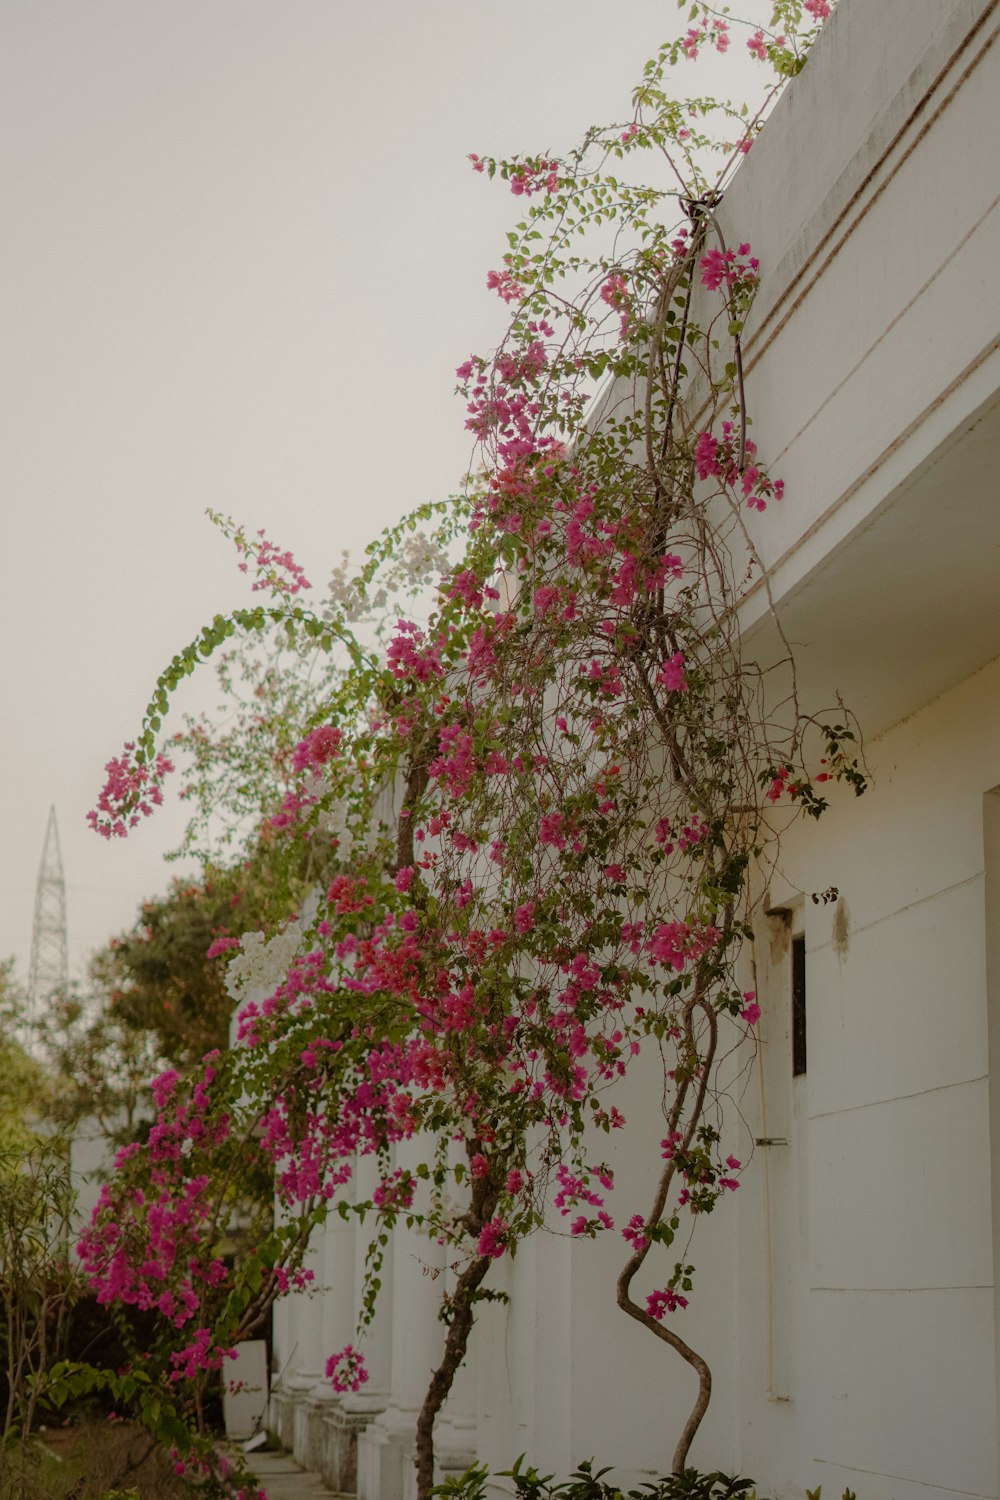 a tree with pink flowers growing on it